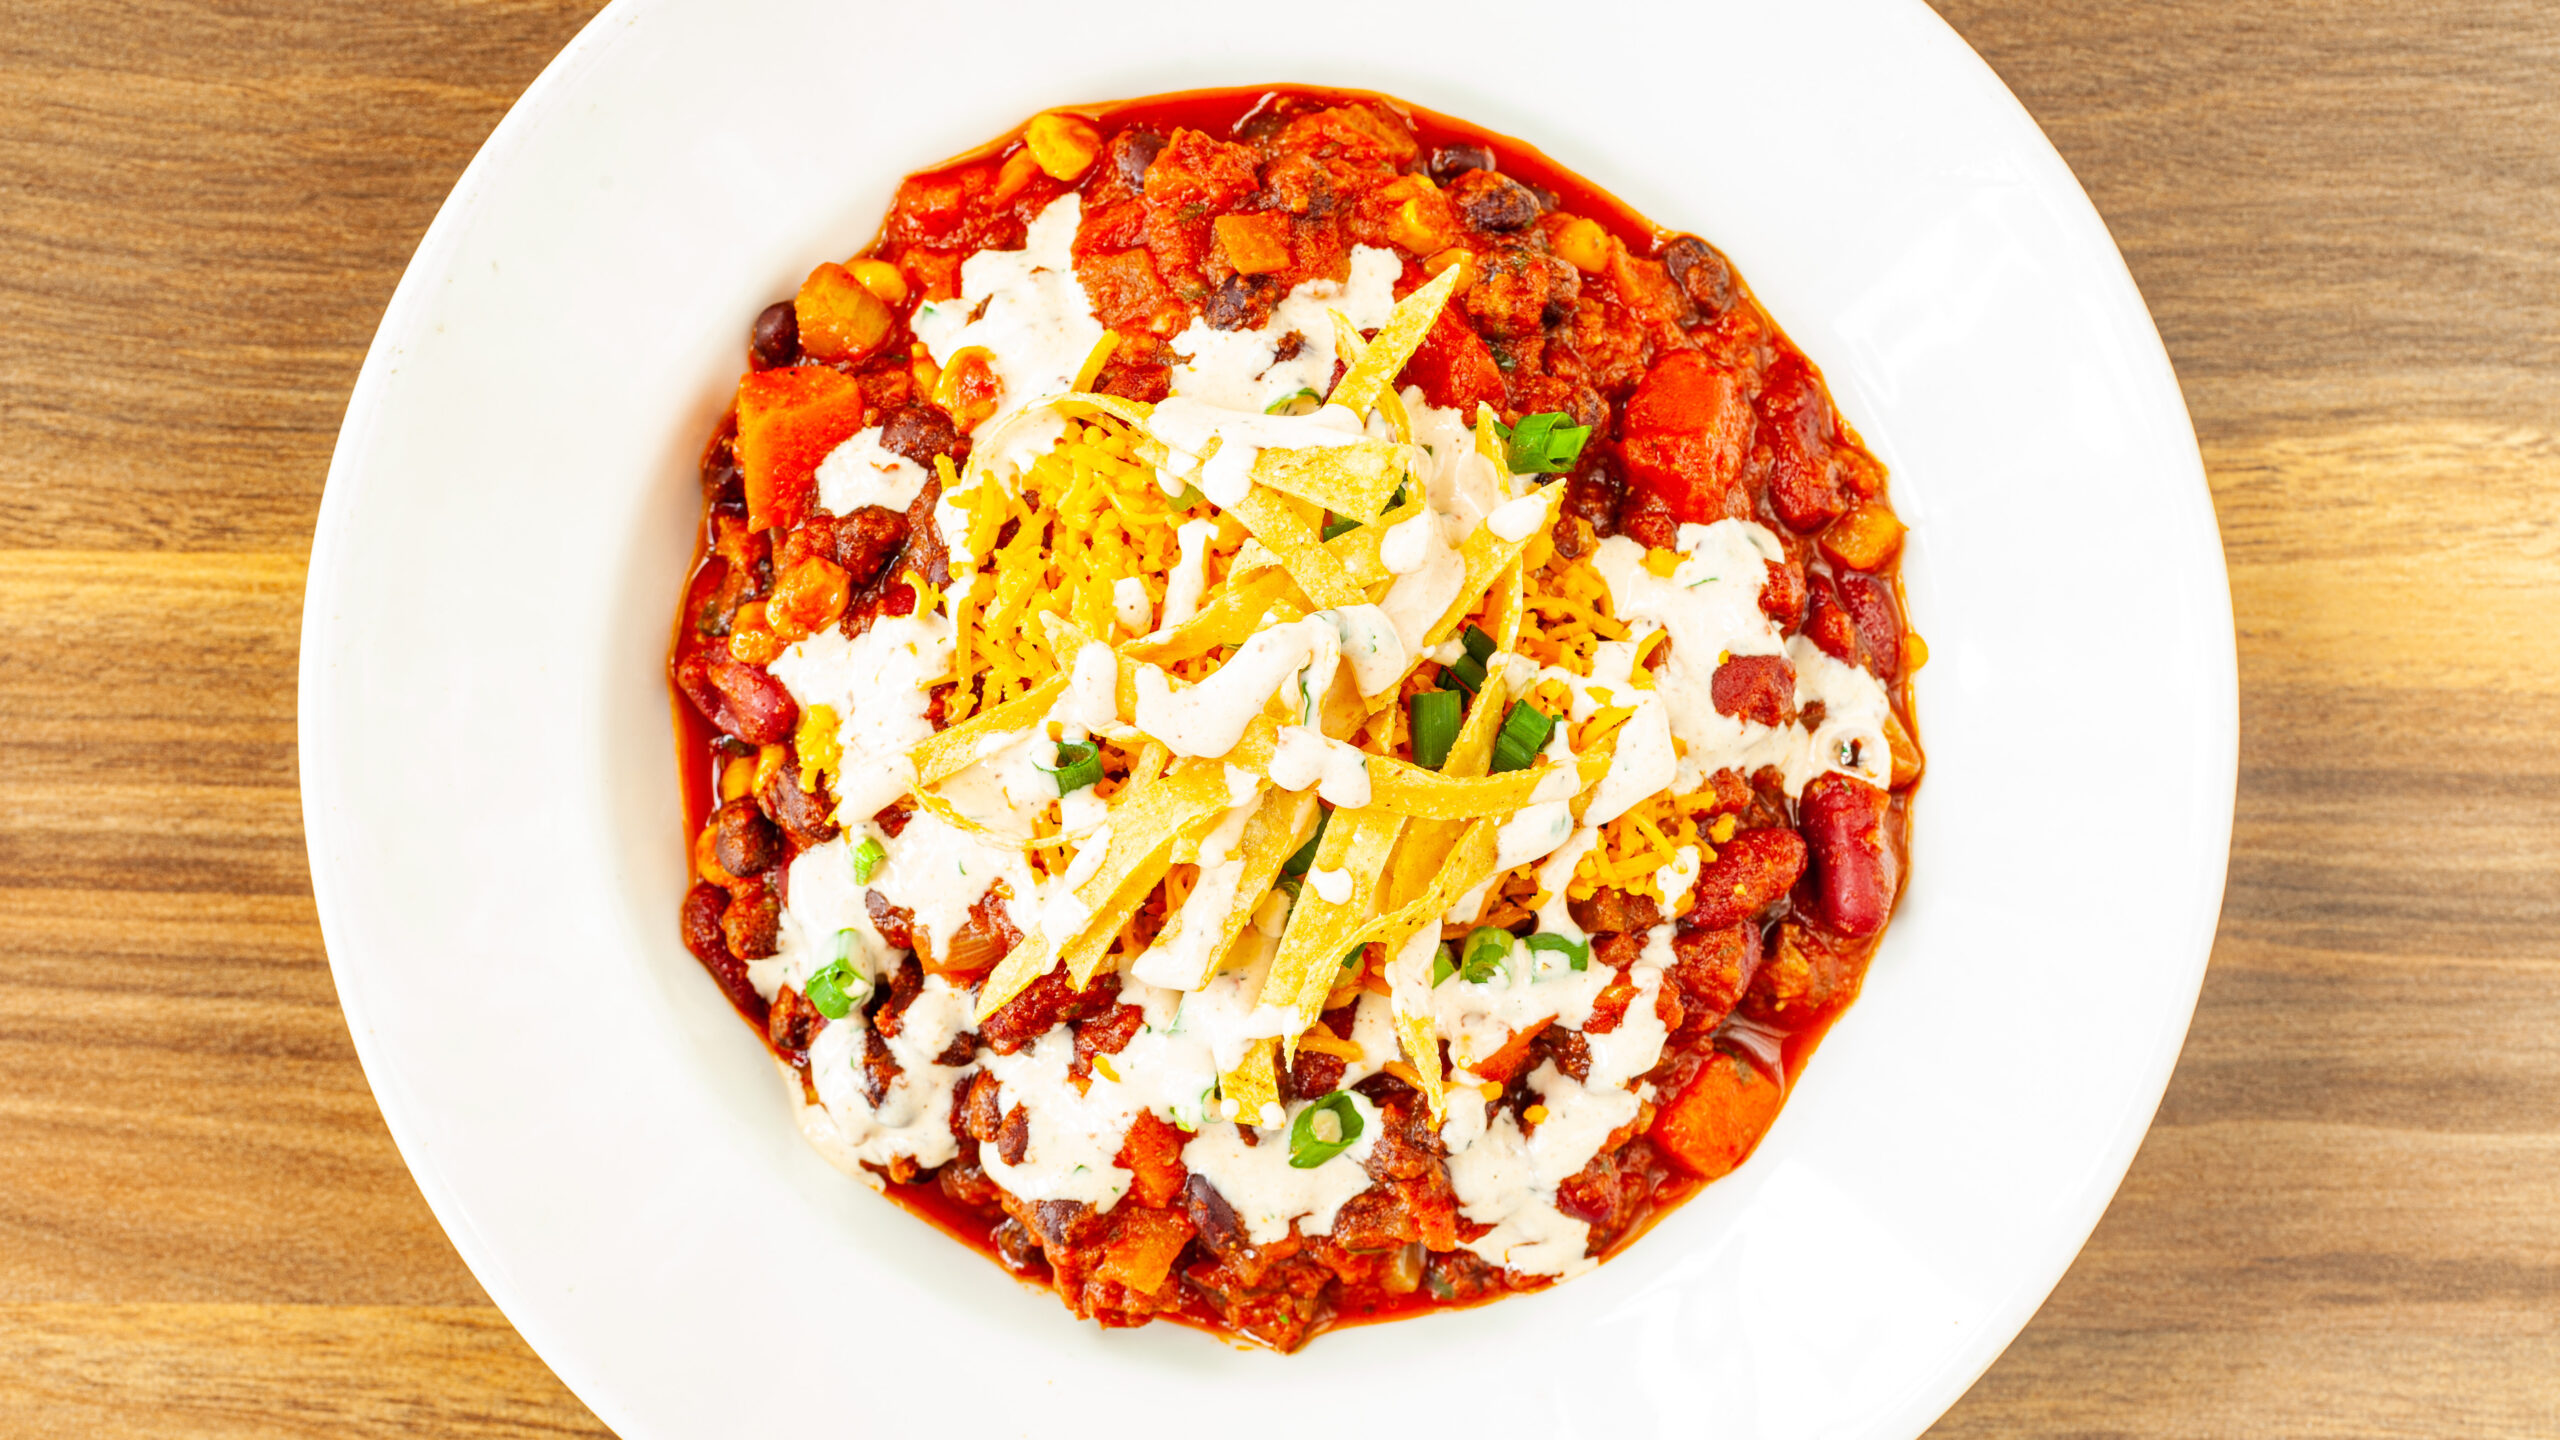 A delicious bowl of Prairie Dog Brewing's Chili Con Carne, from our MexiCali-inspired Baja seasonal menu.